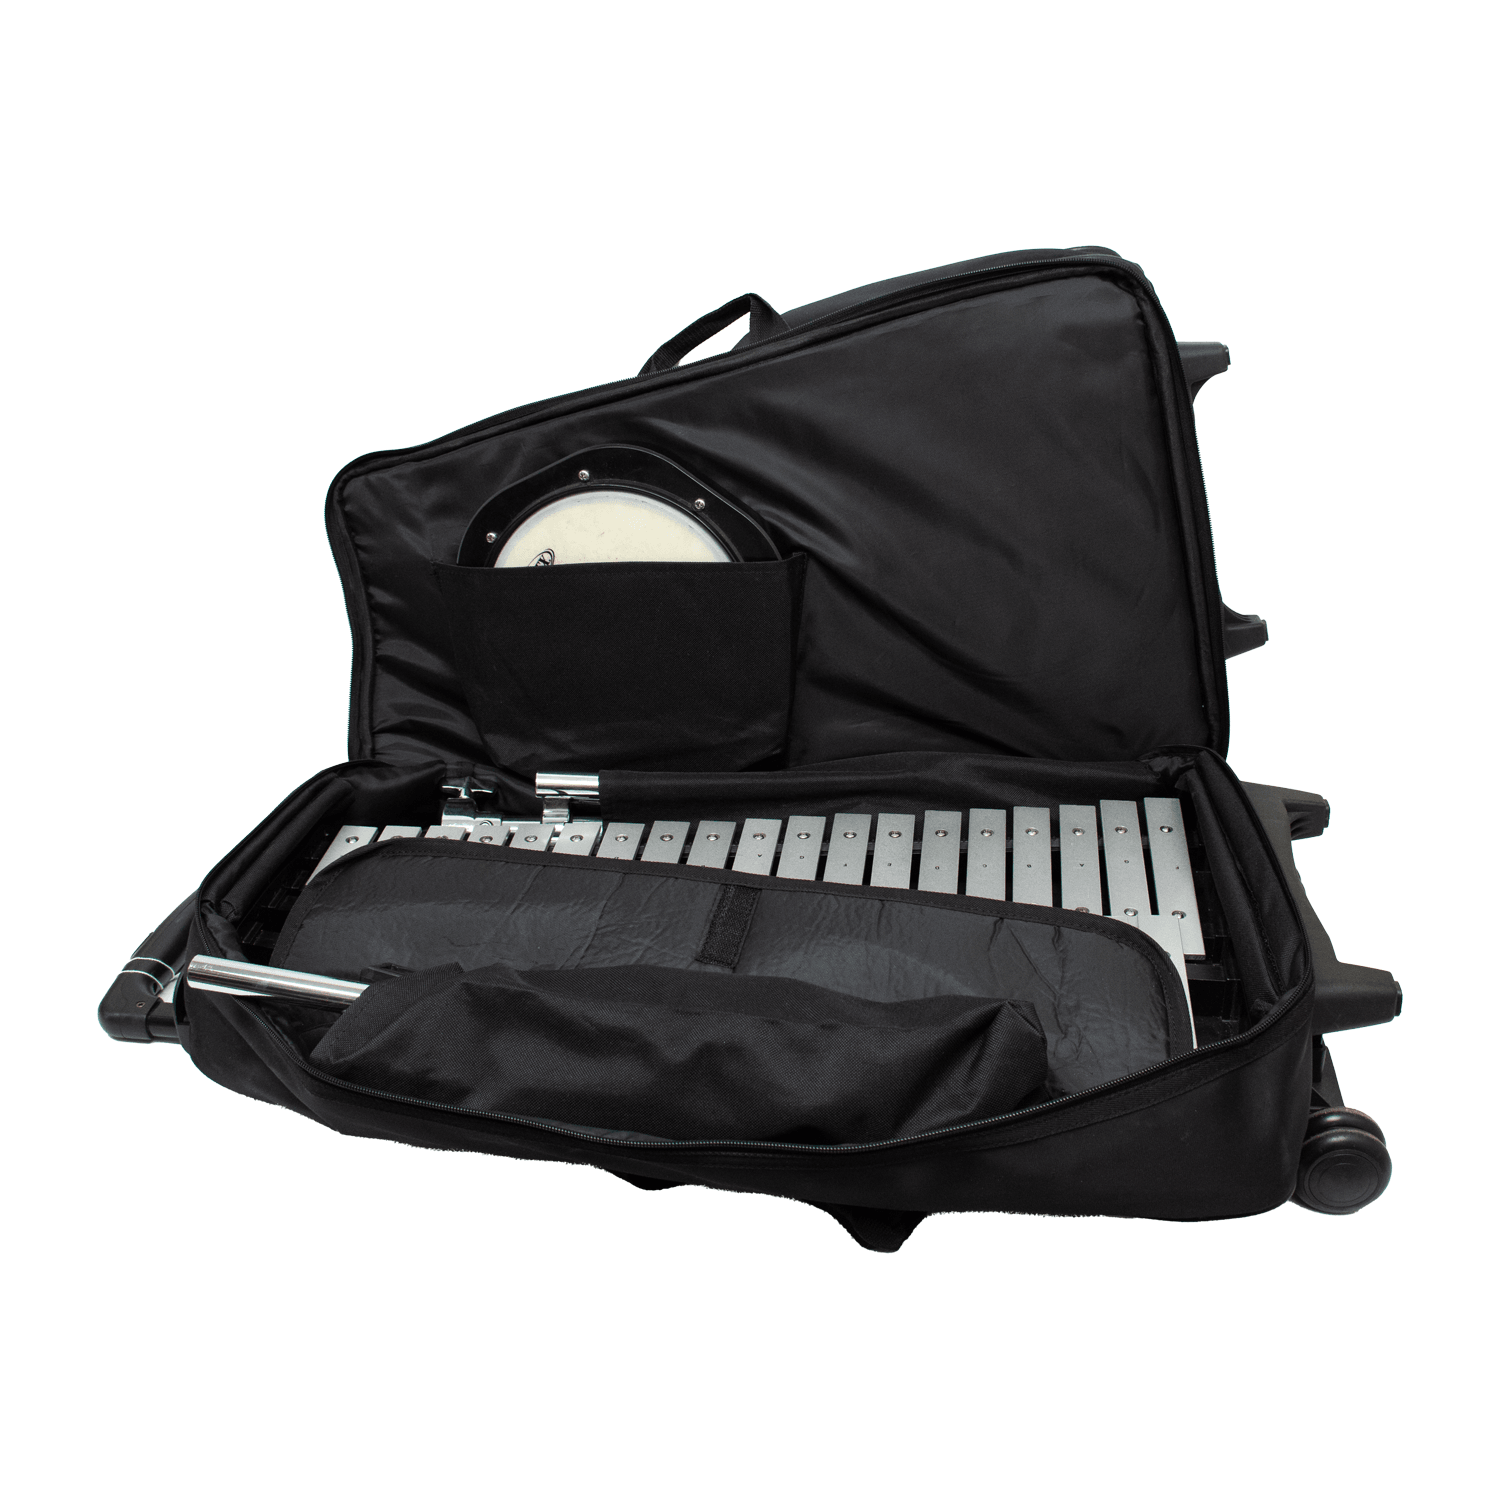 Mapex MCK1432DP Snare Drum/Bell Percussion Kit / Backpack - ipawnishop.com